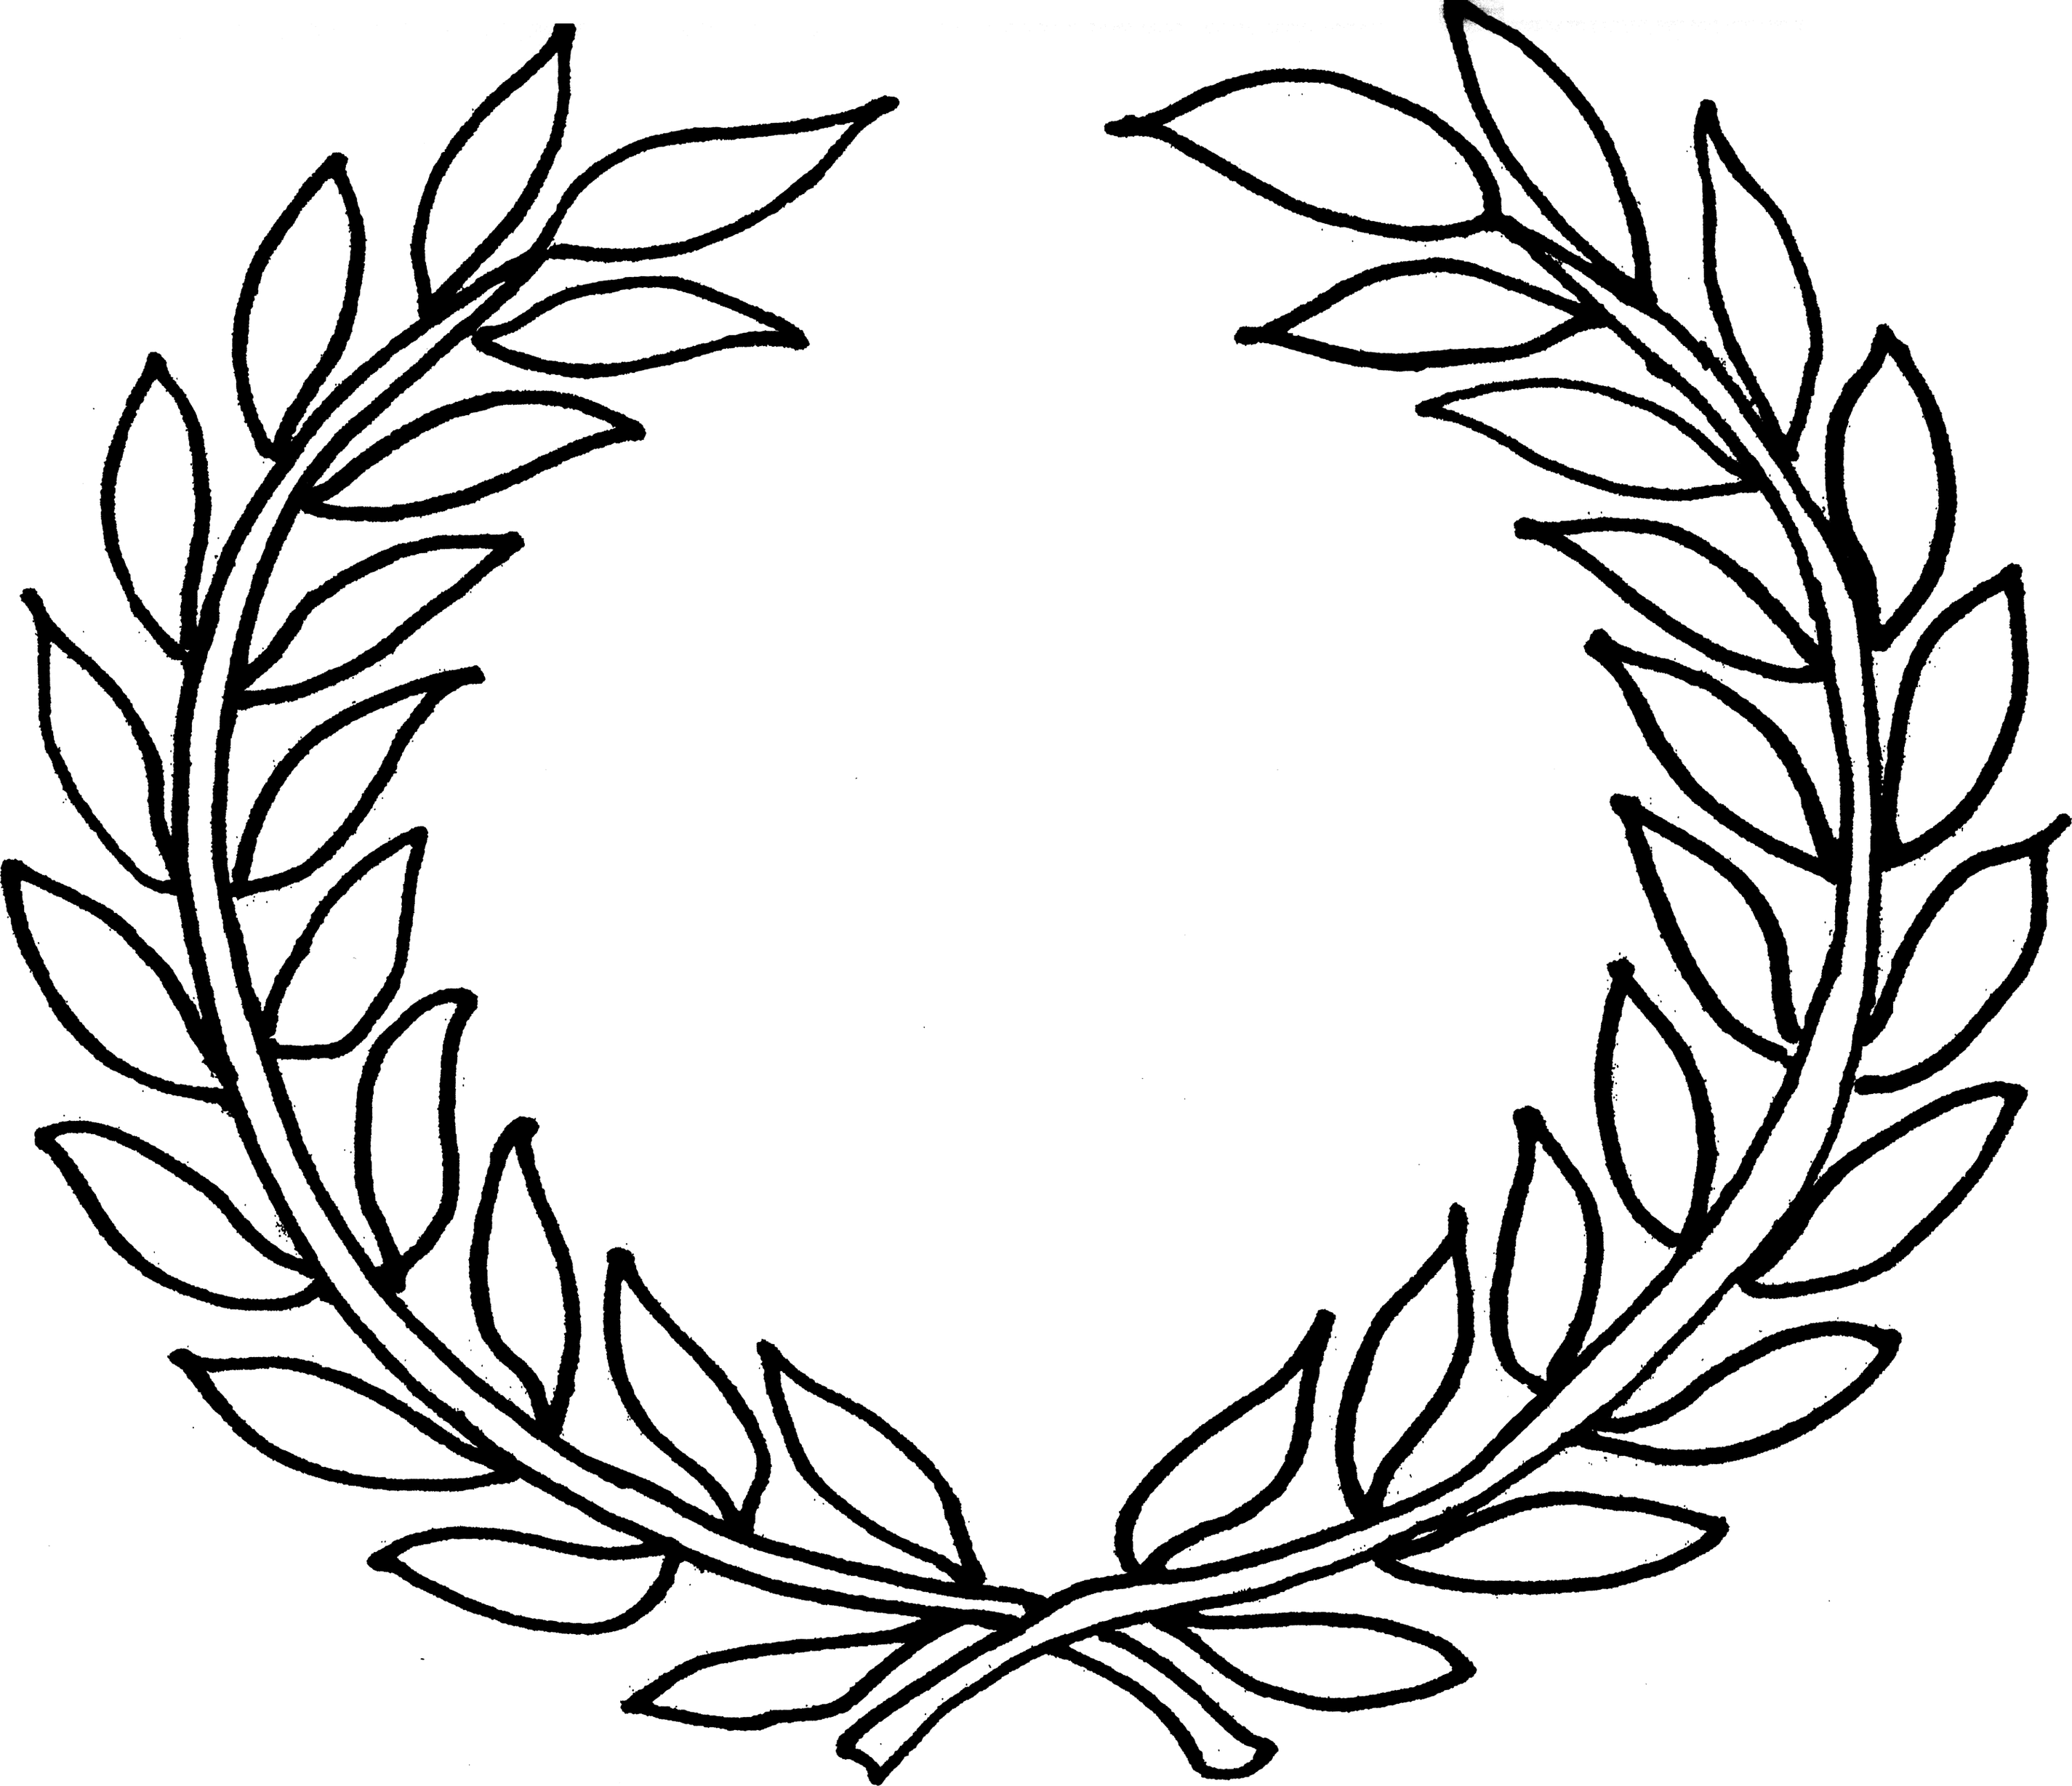 Free Laurel Wreath Vector Clipart - Free to use Clip Art Resource